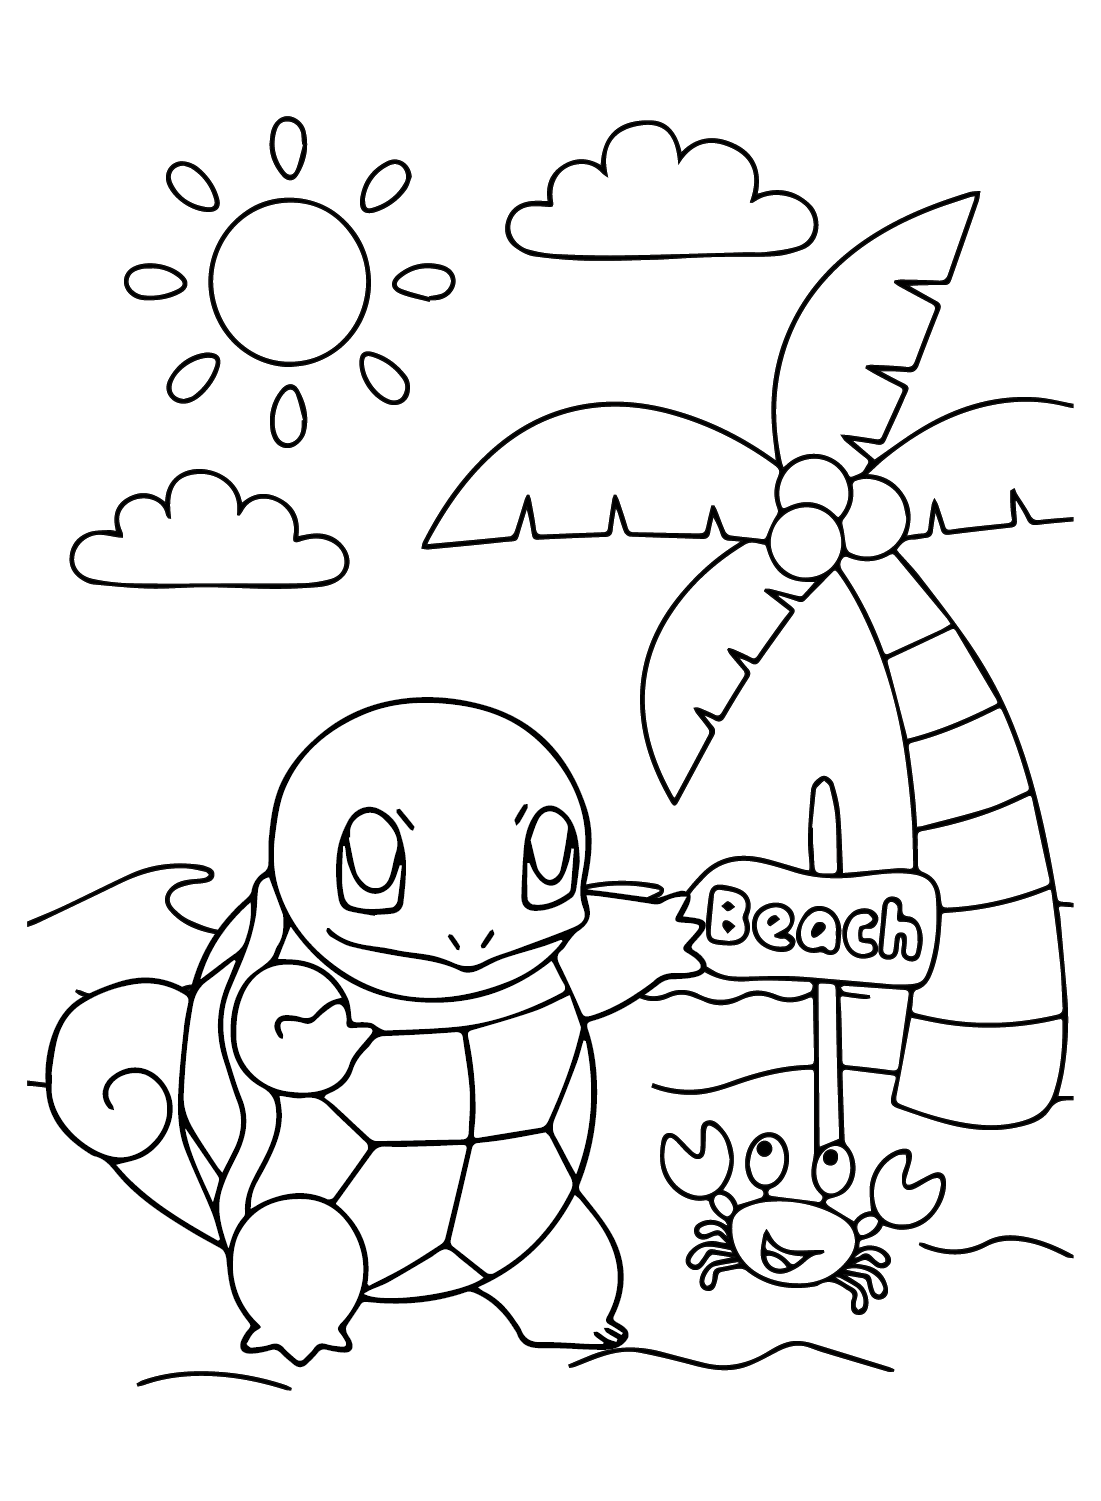 Squirtle Coloring Sheet from Squirtle